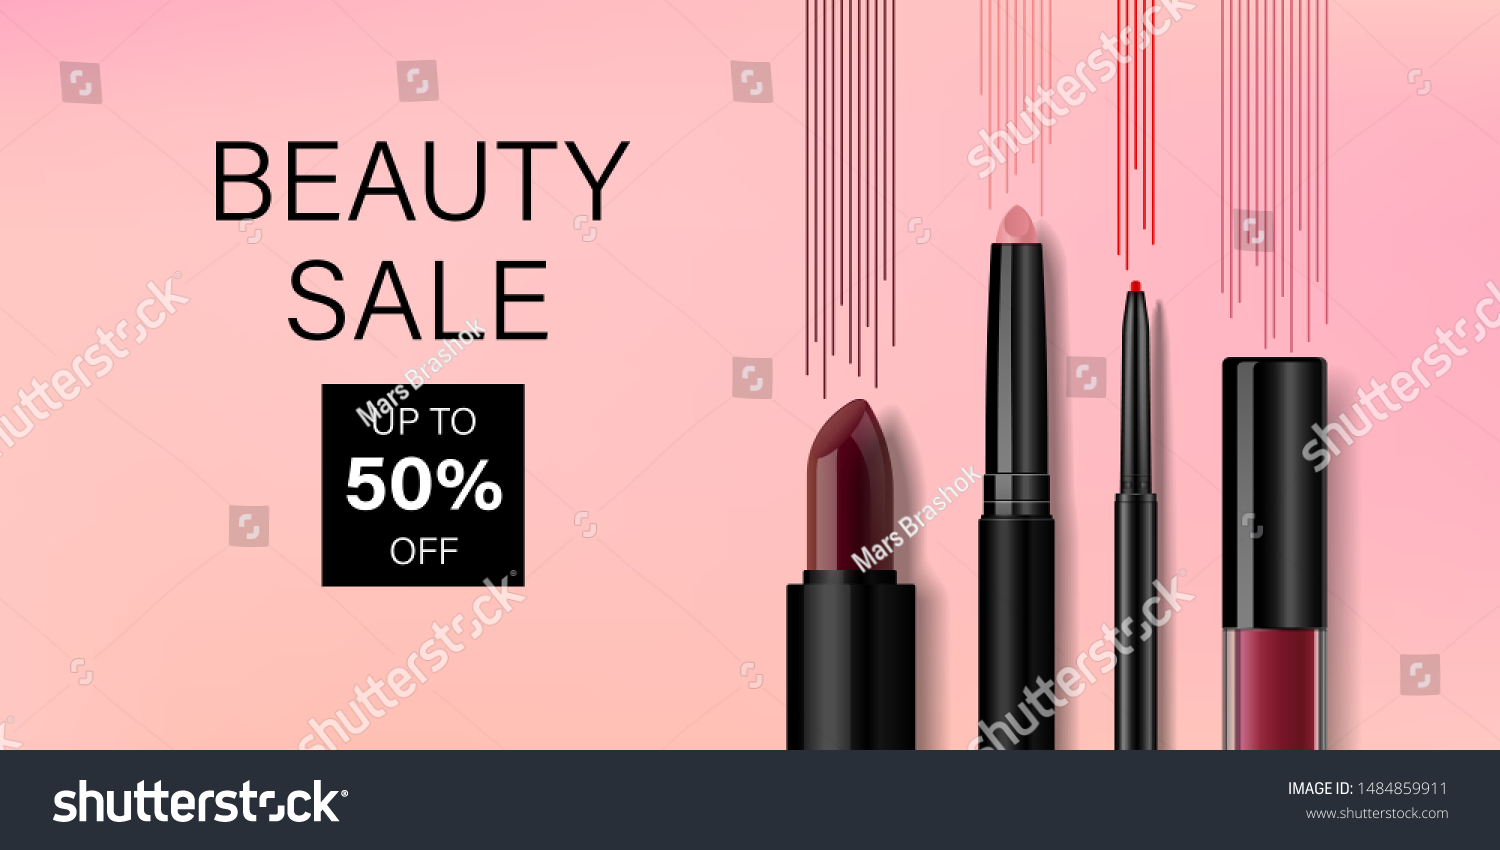 Beauty make up banner template. Lip cosmetic products with decorative lines on pink background. Advertising poster design for beauty store, blog, magazine, offers and promotion. Vector illustration. #1484859911